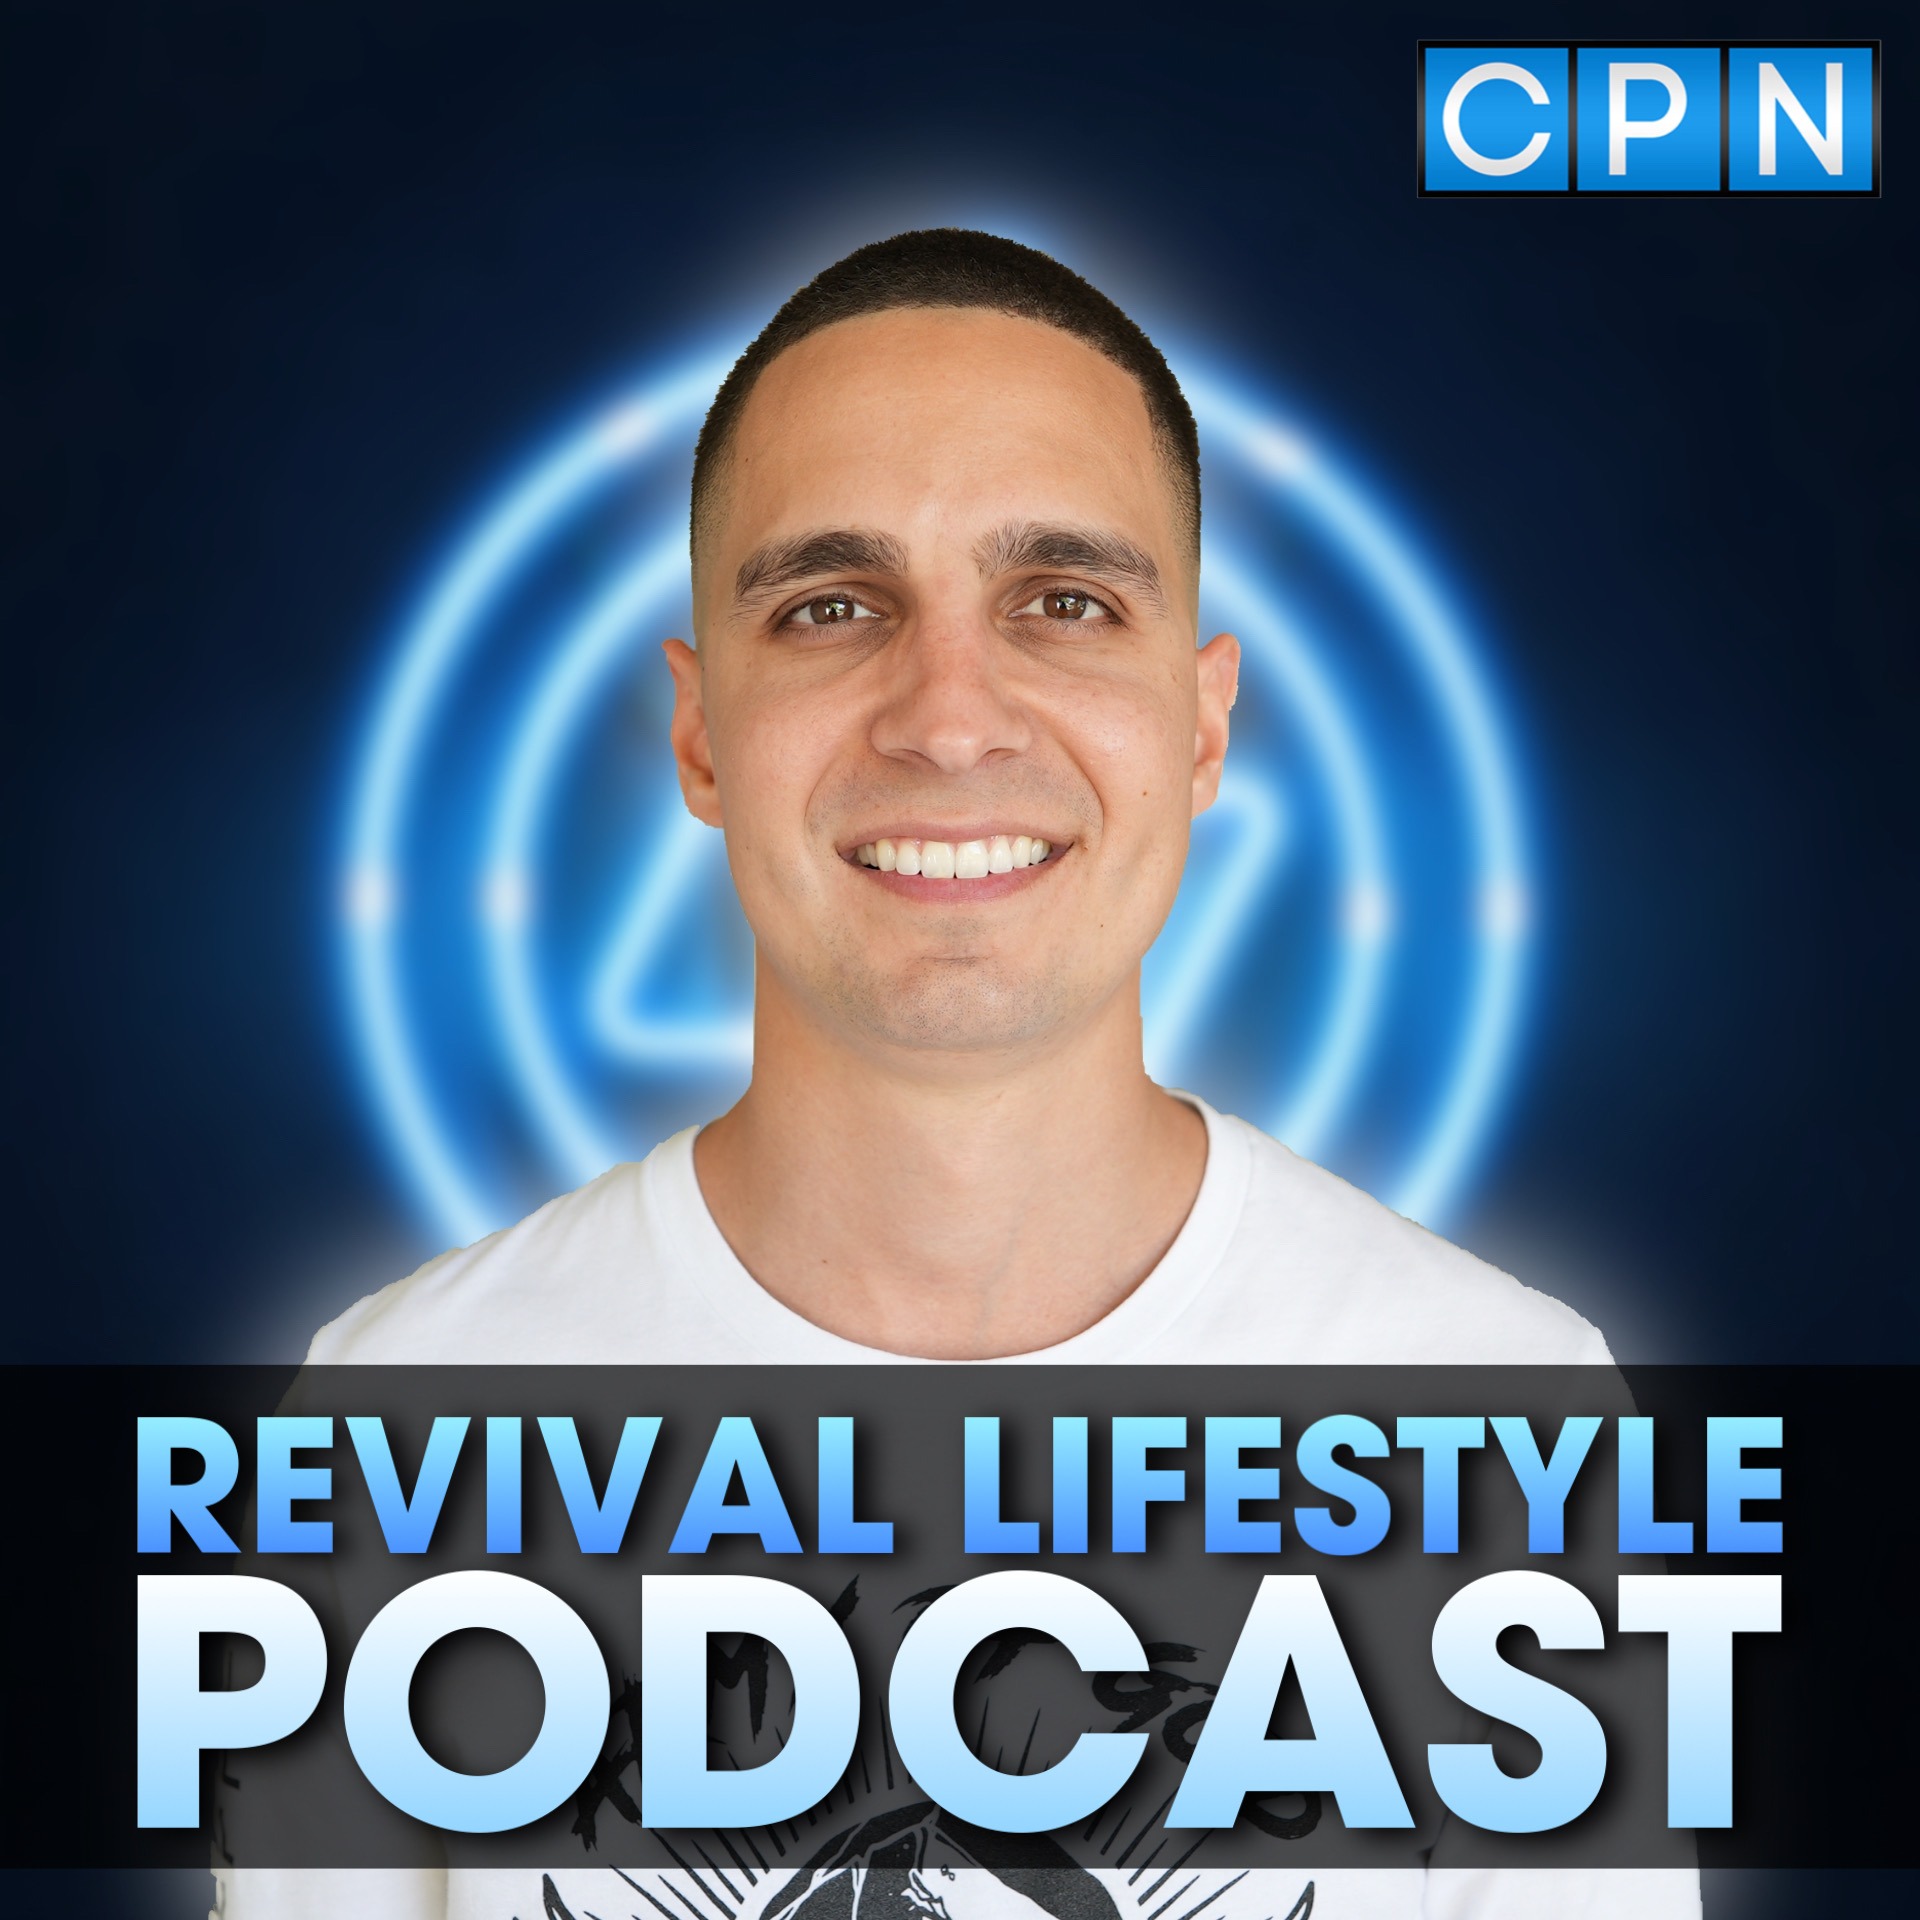 Don't miss the Revival that is happening right now! W/ Jenny Weaver (Ep 173)